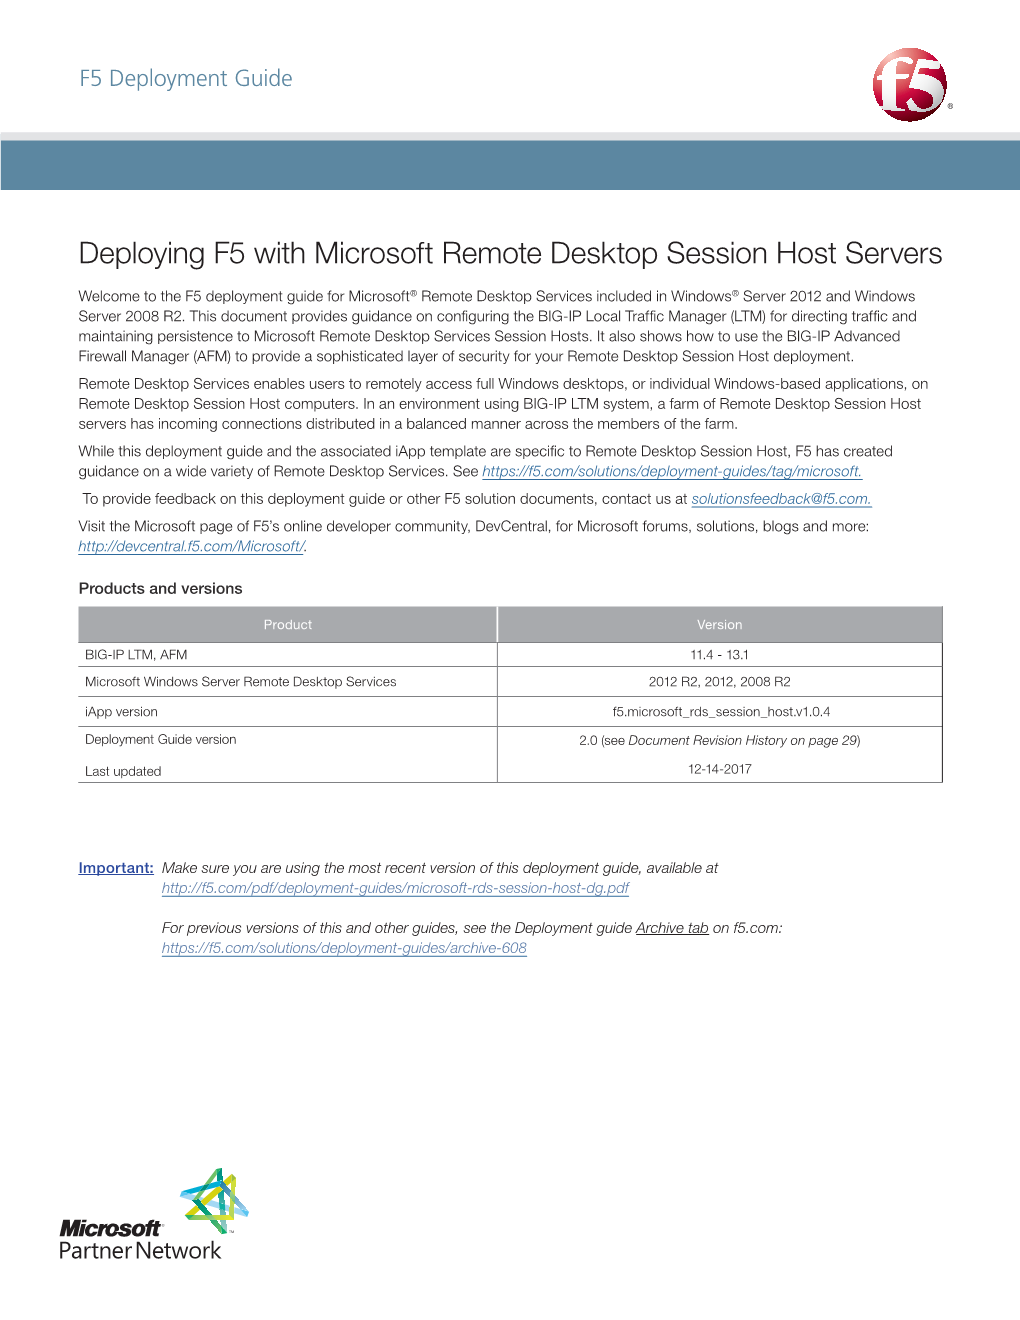 Deploying F5 with Microsoft Remote Desktop Session Host Servers